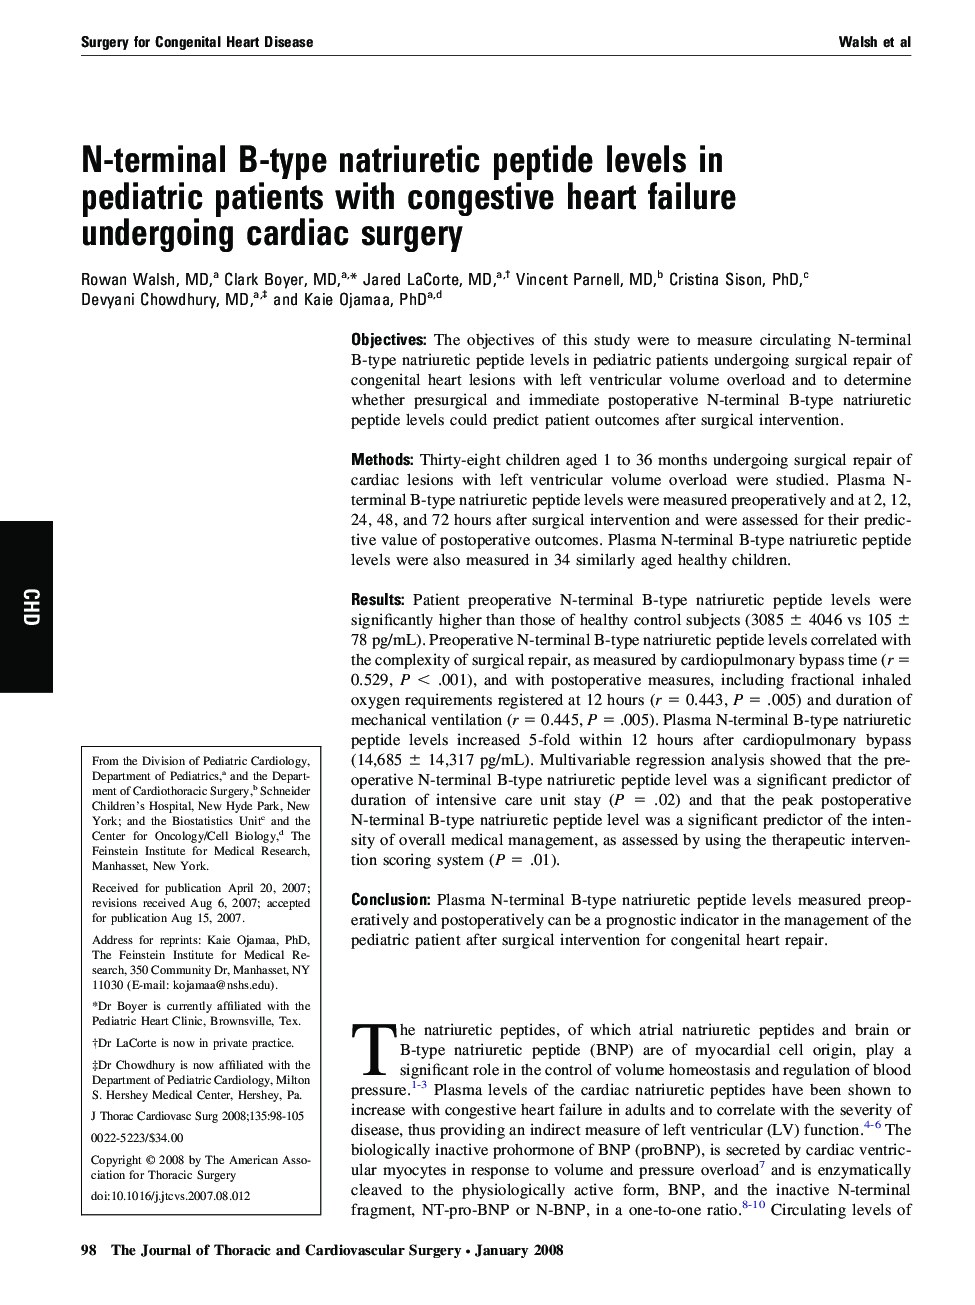 N-terminal B-type natriuretic peptide levels in pediatric patients with congestive heart failure undergoing cardiac surgery